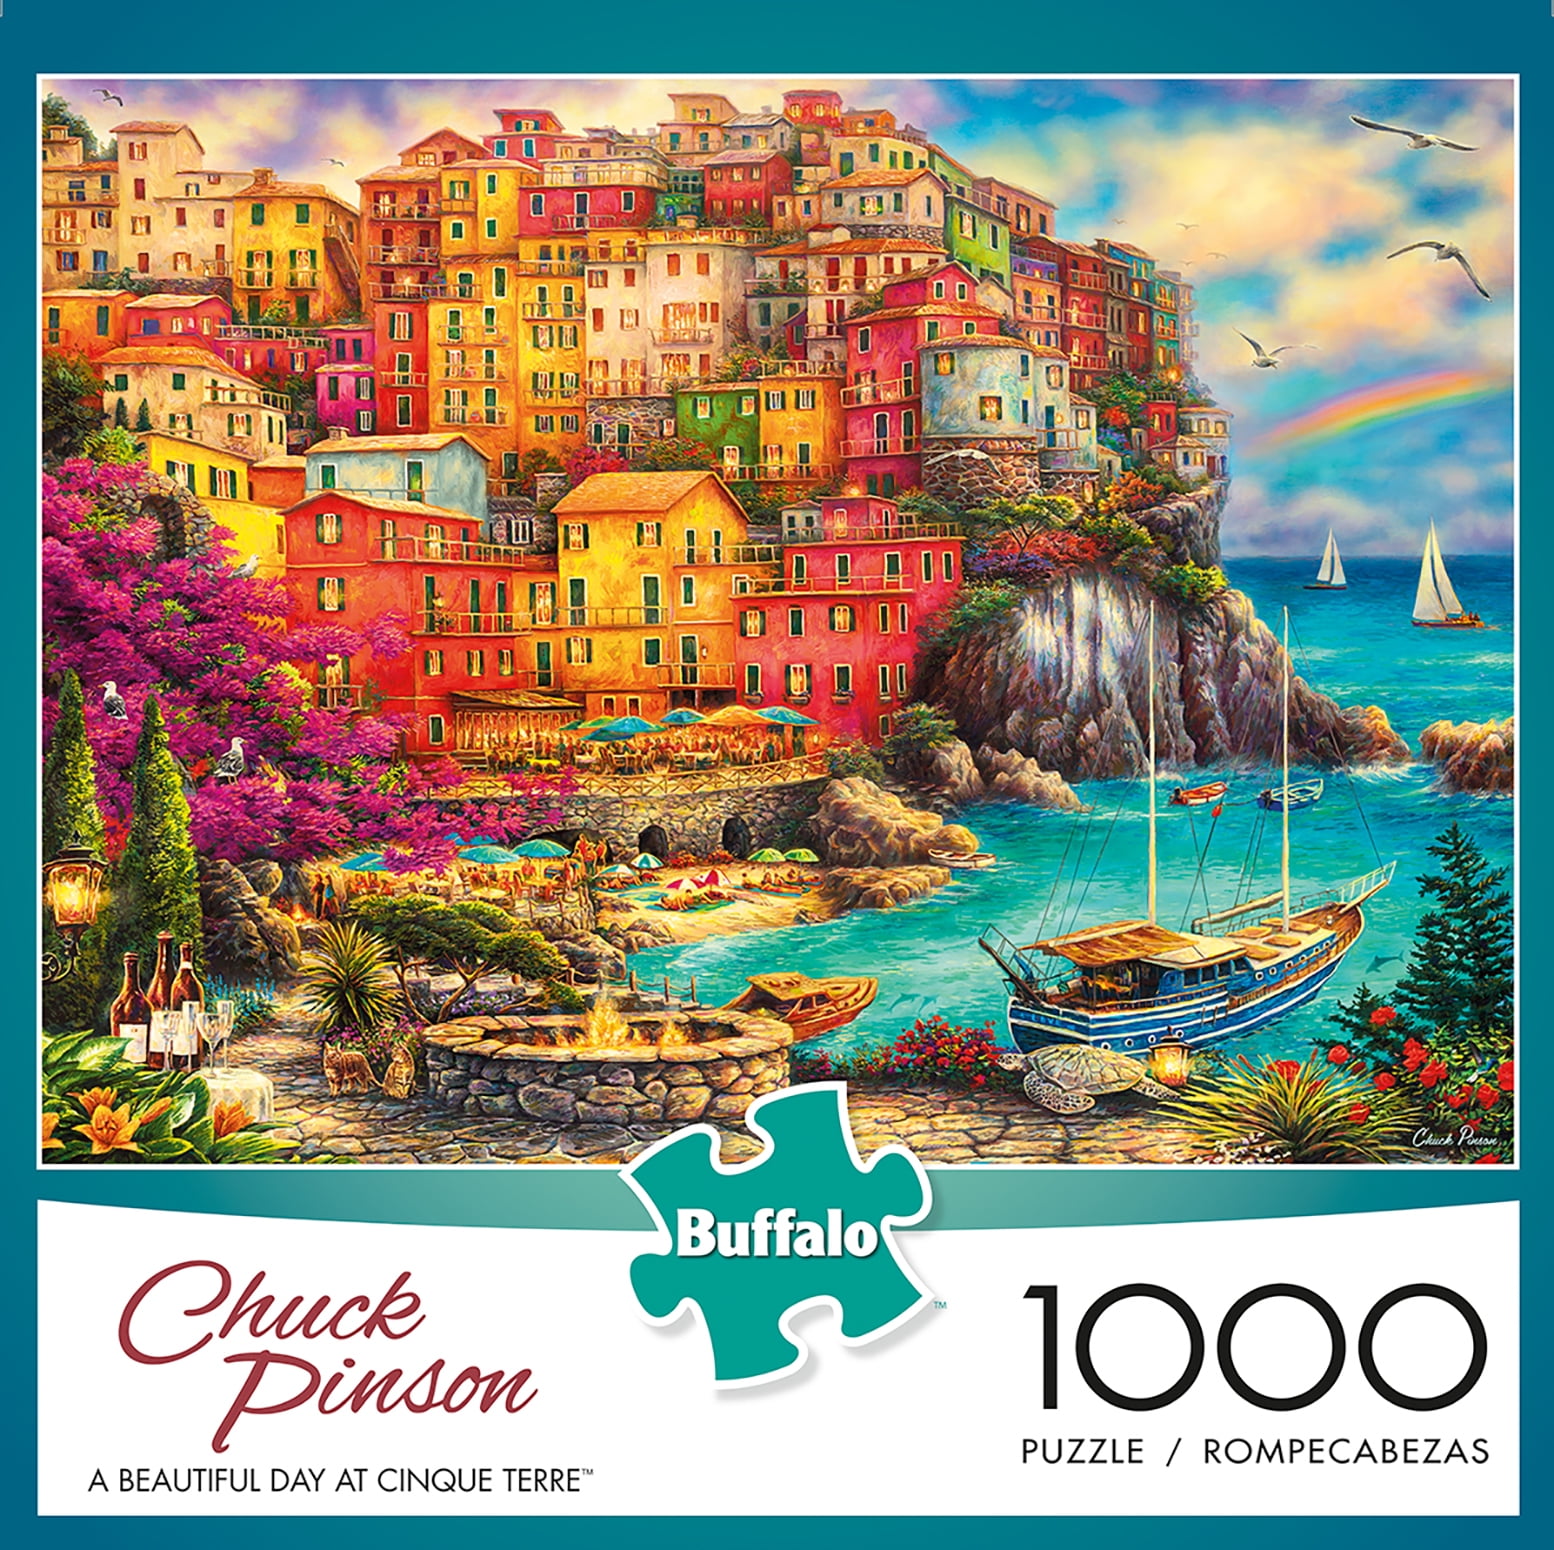 1000 Piece Jigsaw Puzzle 750 Piece Jigsaw Puzzle & Signature Collection Cinque Terre Mountains on Fire Reflections Buffalo Games